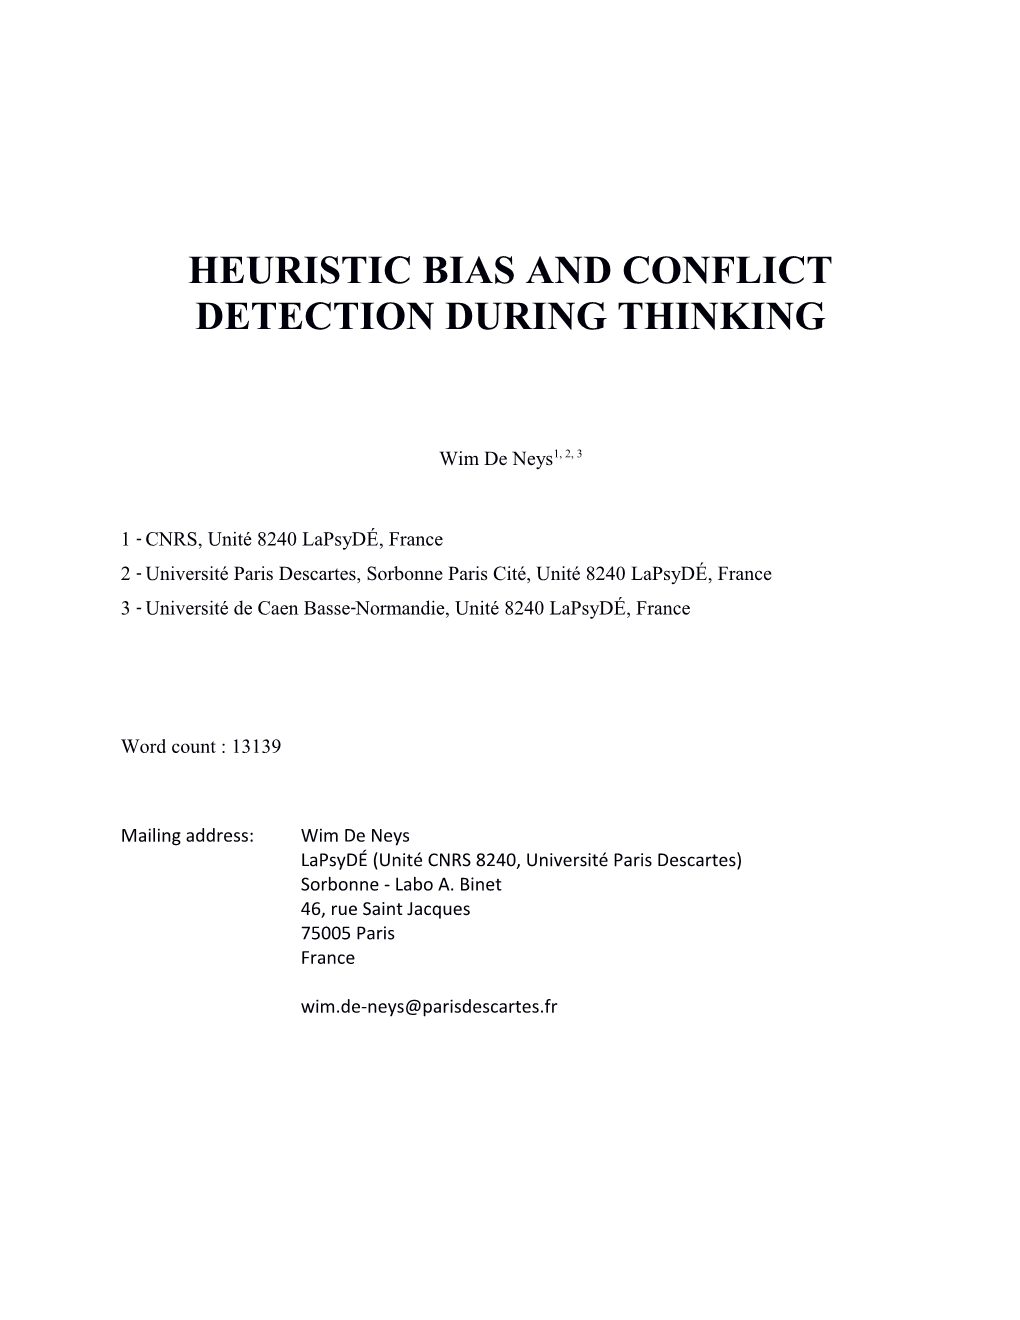 Heuristic Bias and Conflict Detection During Thinking